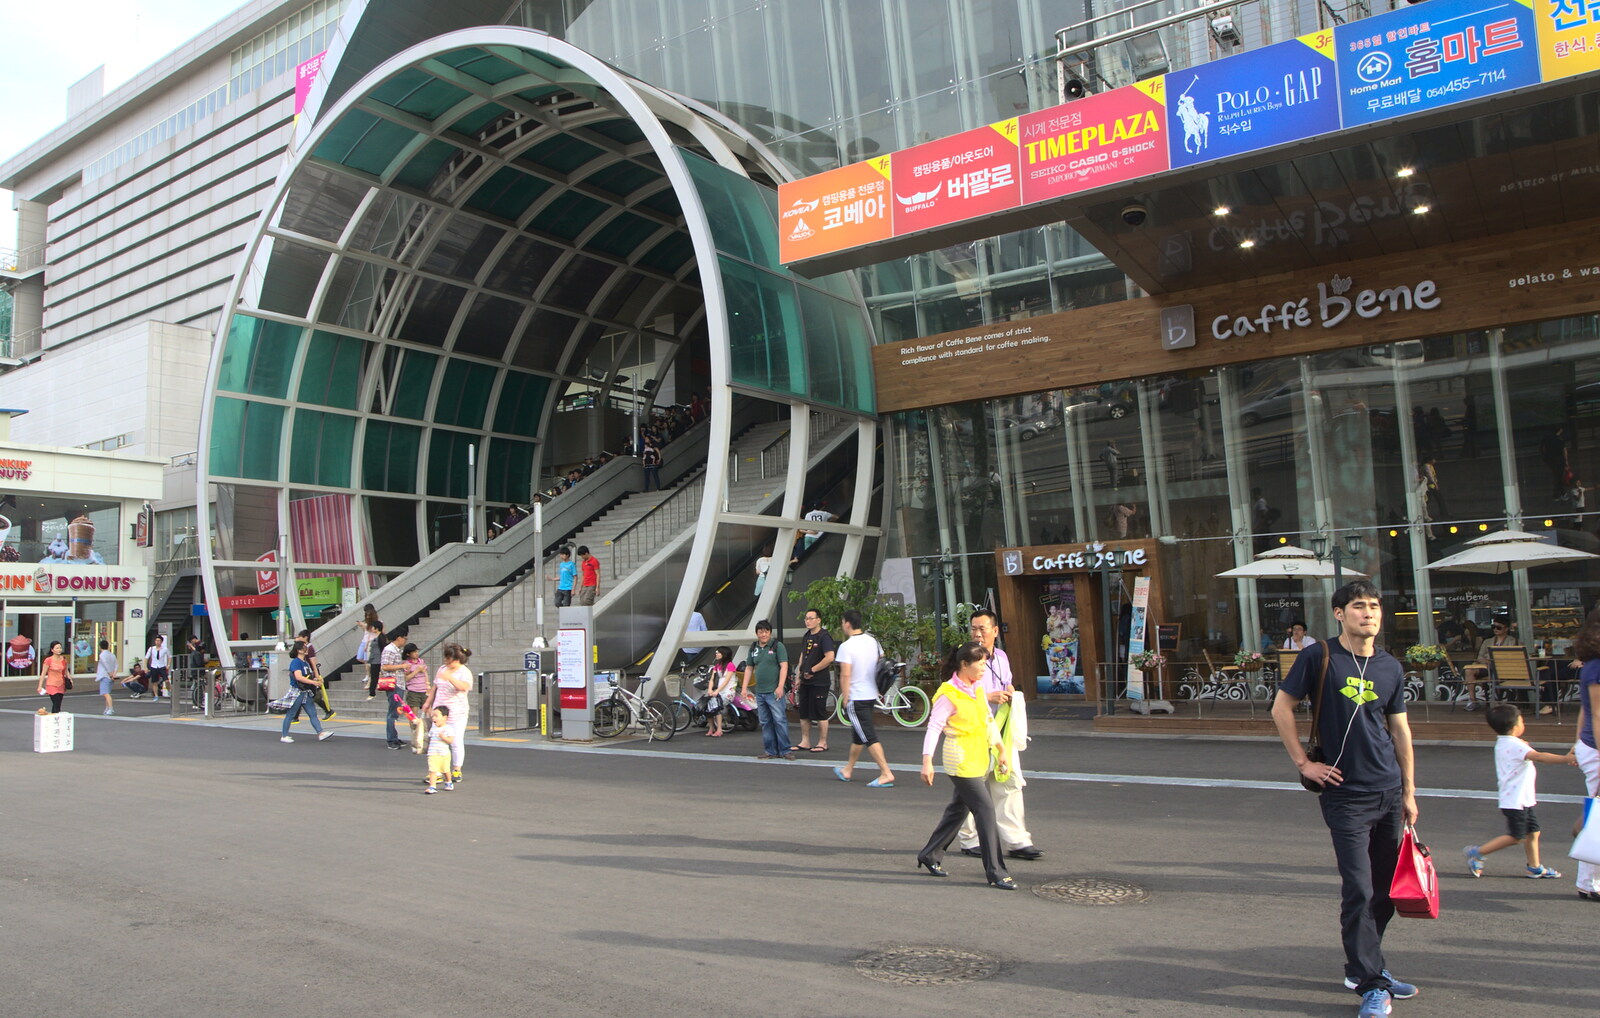 The tunnel entrance to the station from Seomun Market, Daegu, South Korea - 1st July 2012